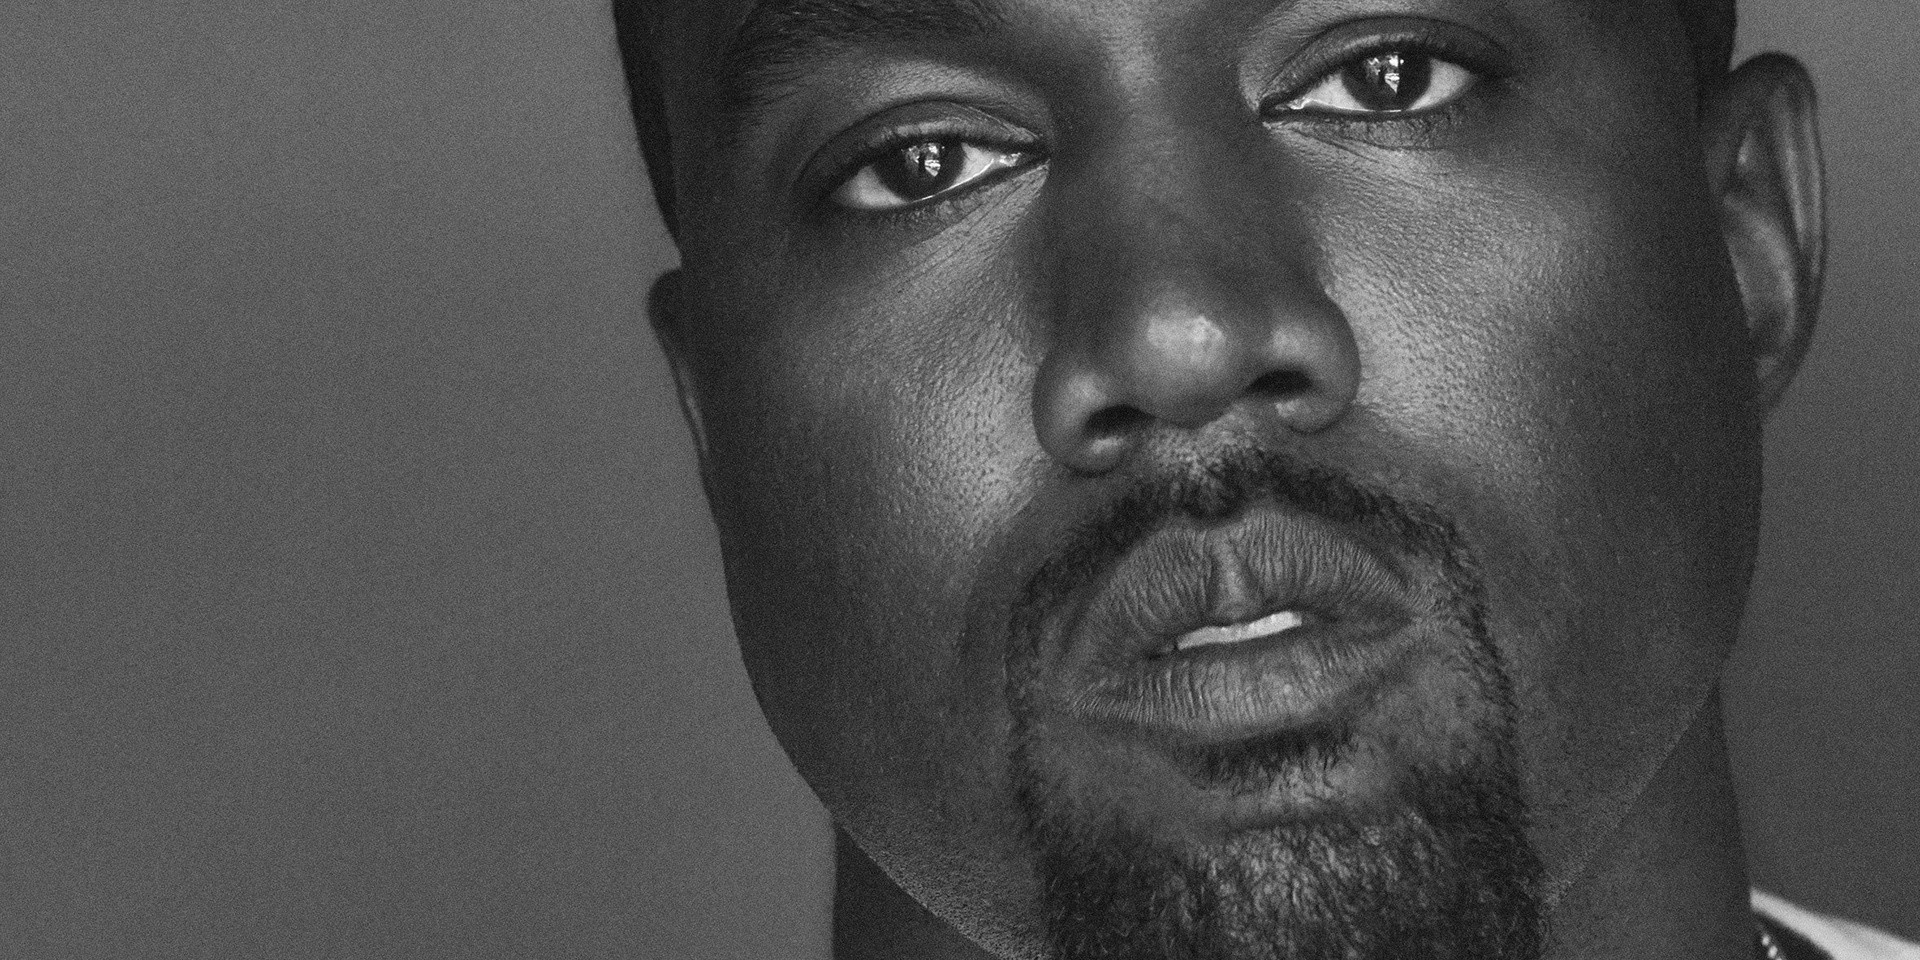 Kanye West livestreams new album 'DONDA' from Atlanta, including features from Jay-Z, Travis Scott, Lil Baby, and more 